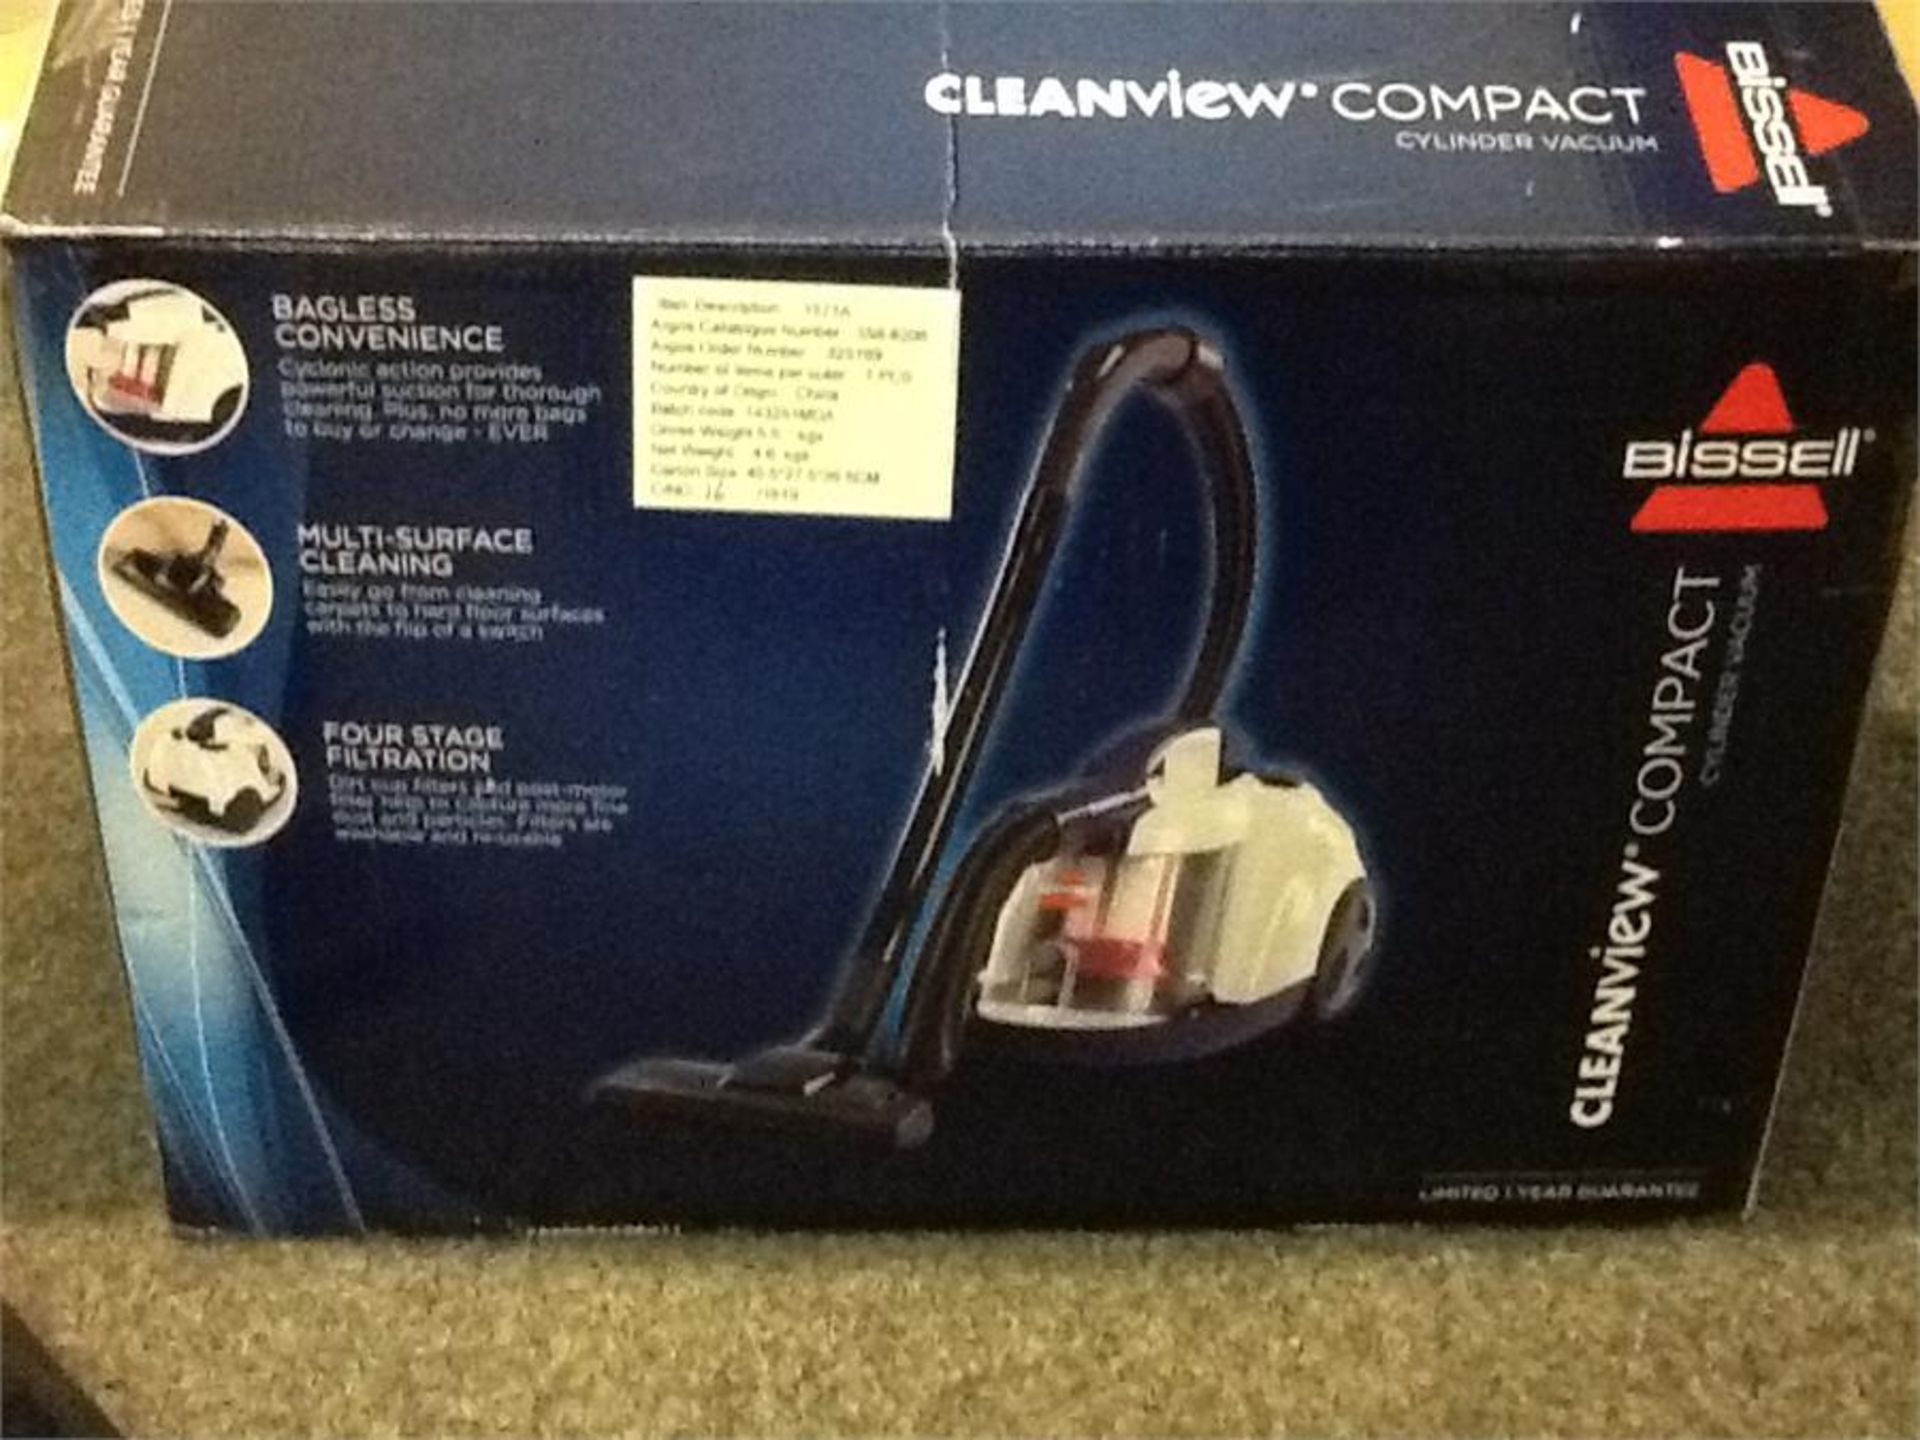 Bissell clearview compact vacume cleaner. Working boxed - Image 2 of 2